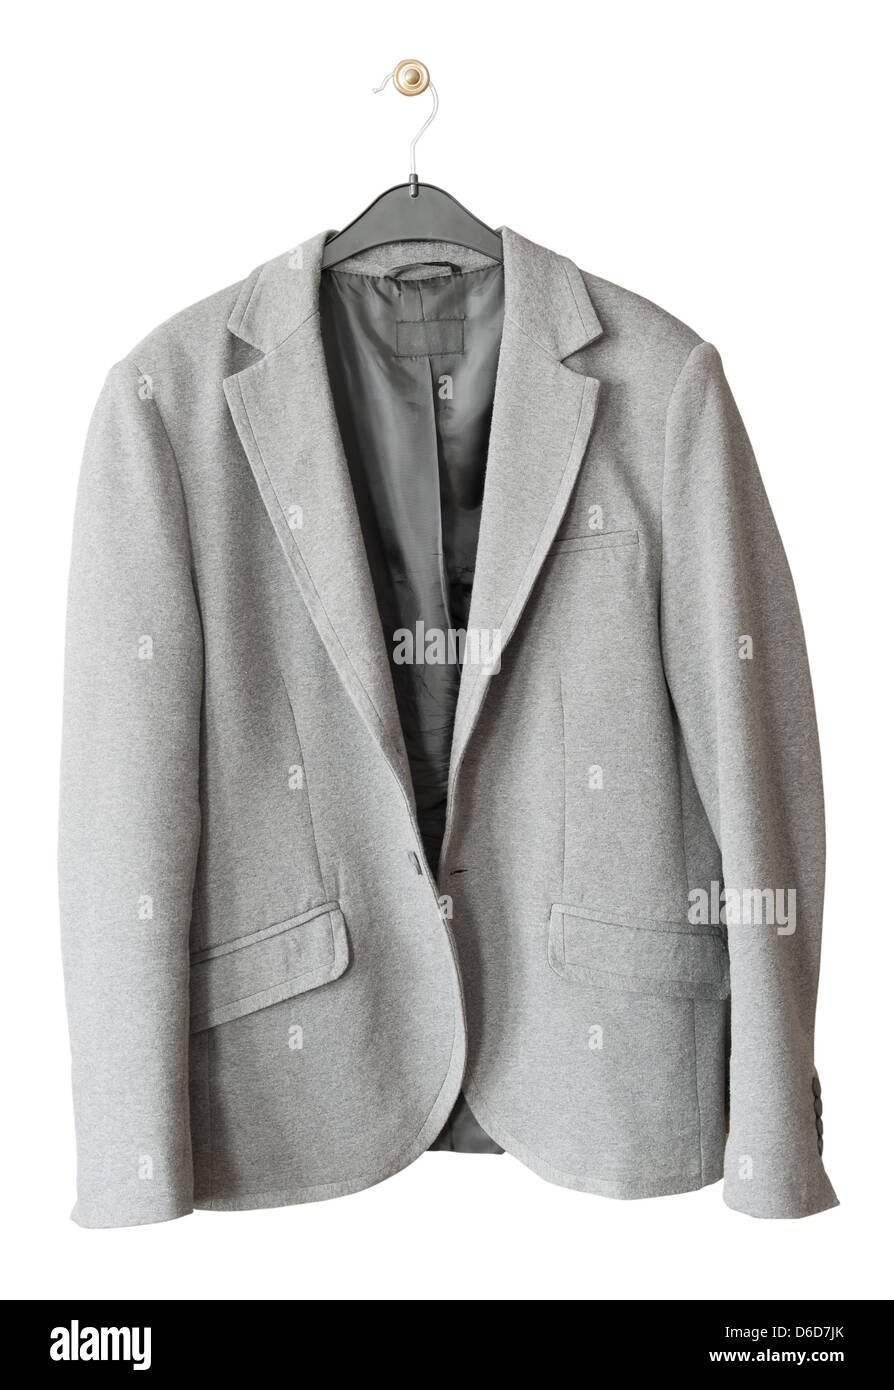 The old gray jacket hangs on a hanger Stock Photo